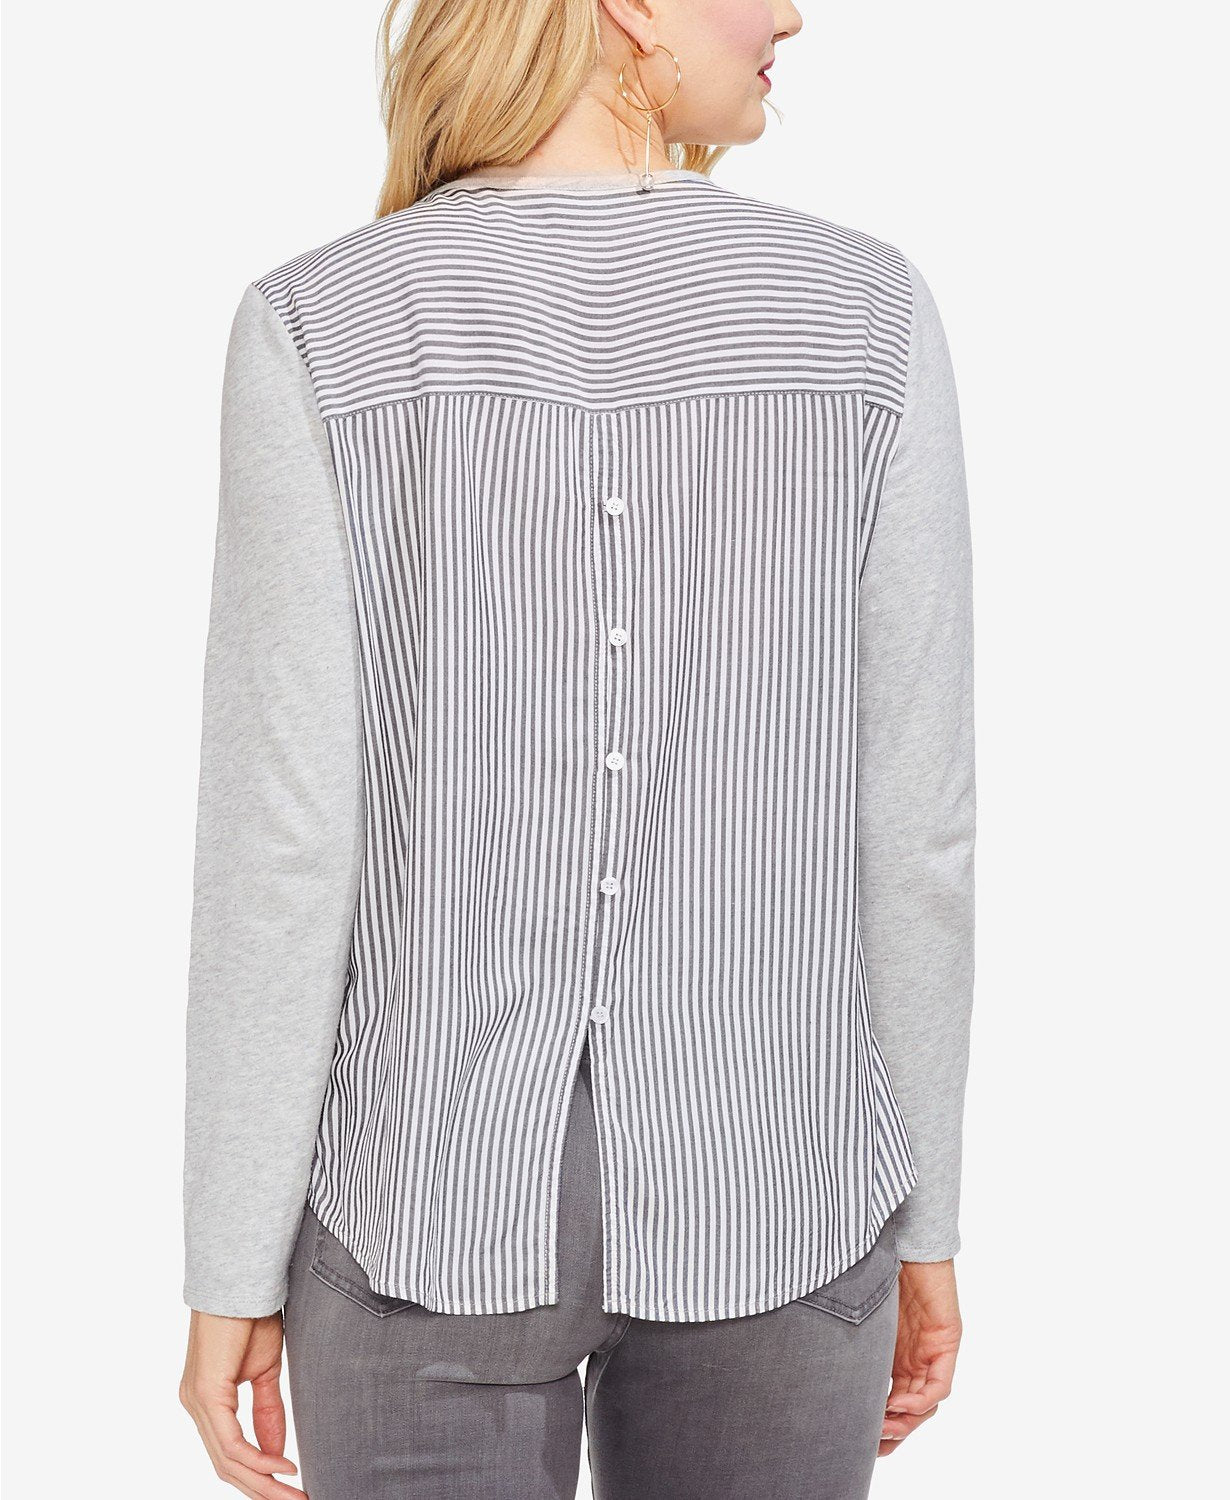 Vince Camuto Mixed Media Striped Top - TopLine Fashion Lounge